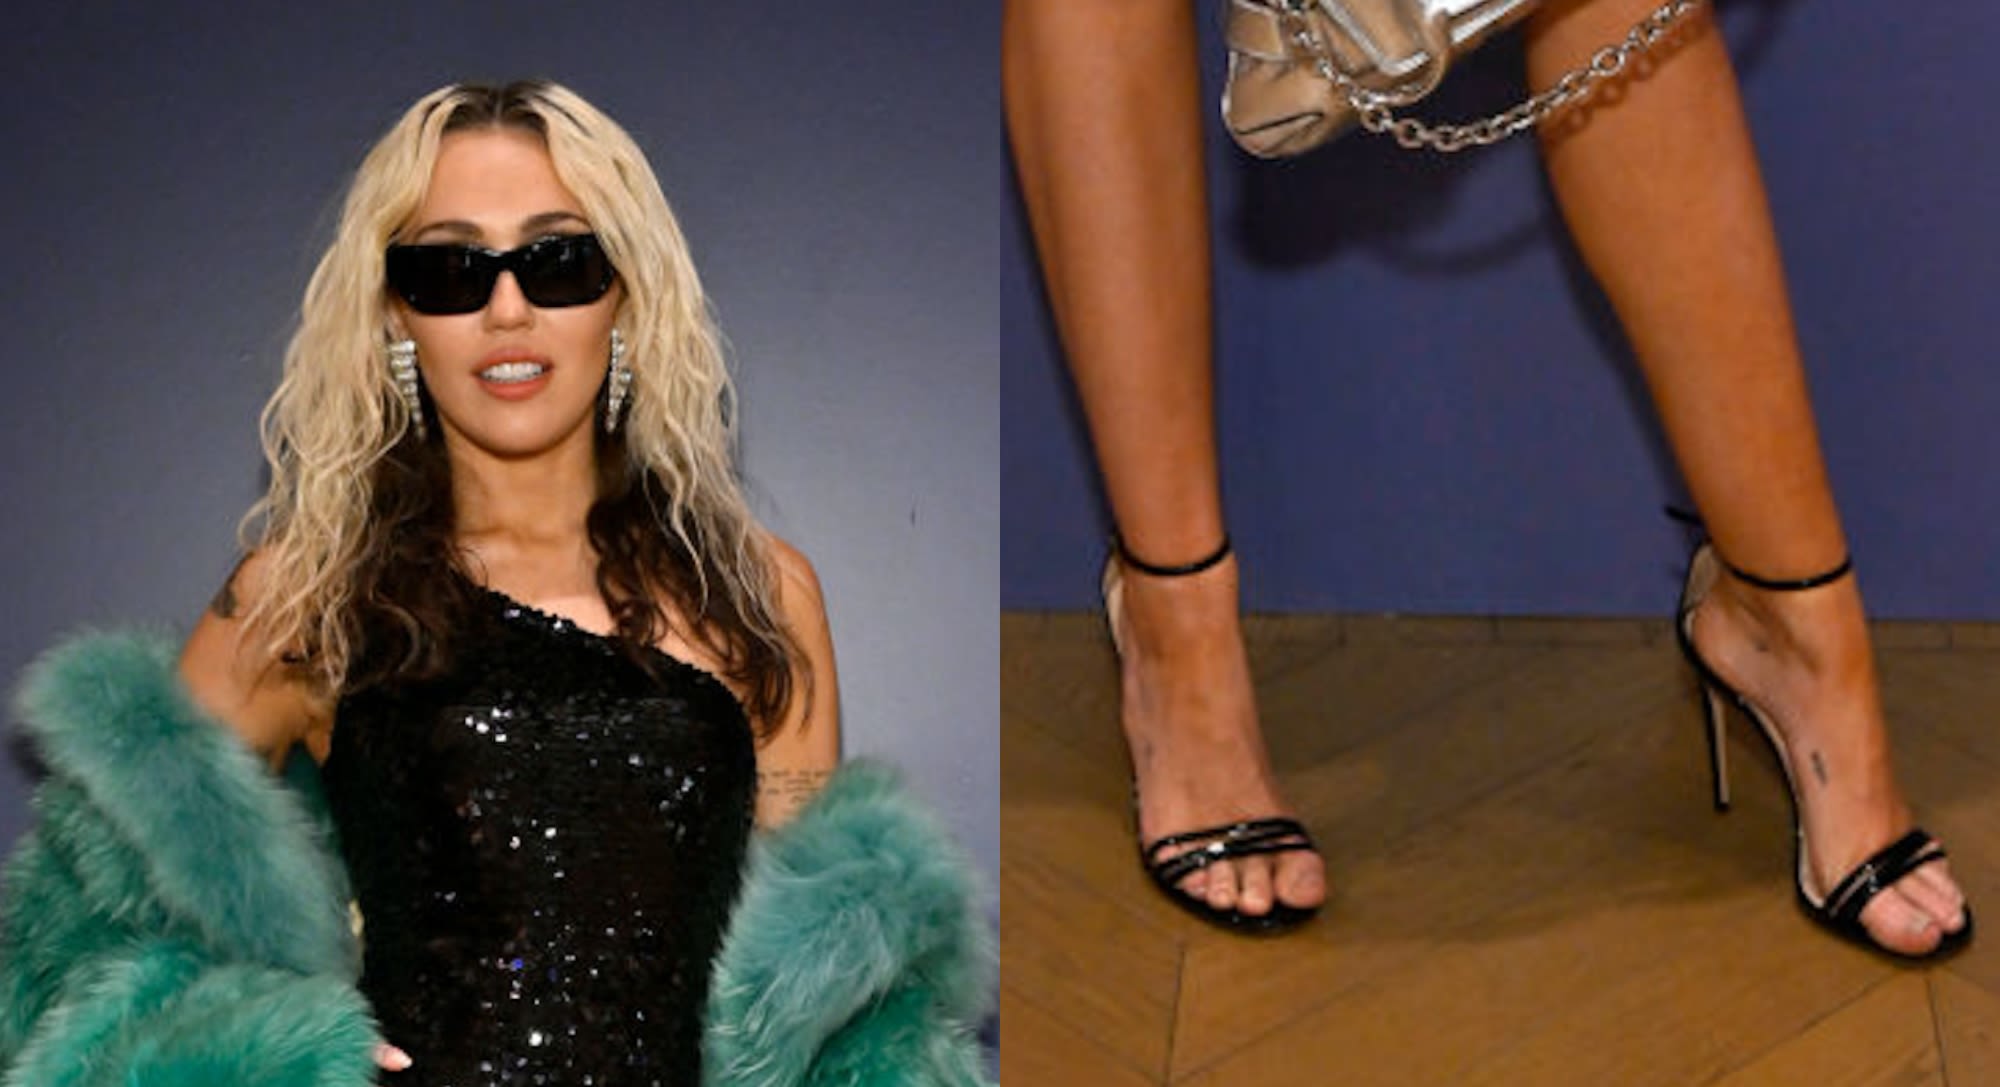 Miley Cyrus Explains Why She Works Out in Gucci Heels